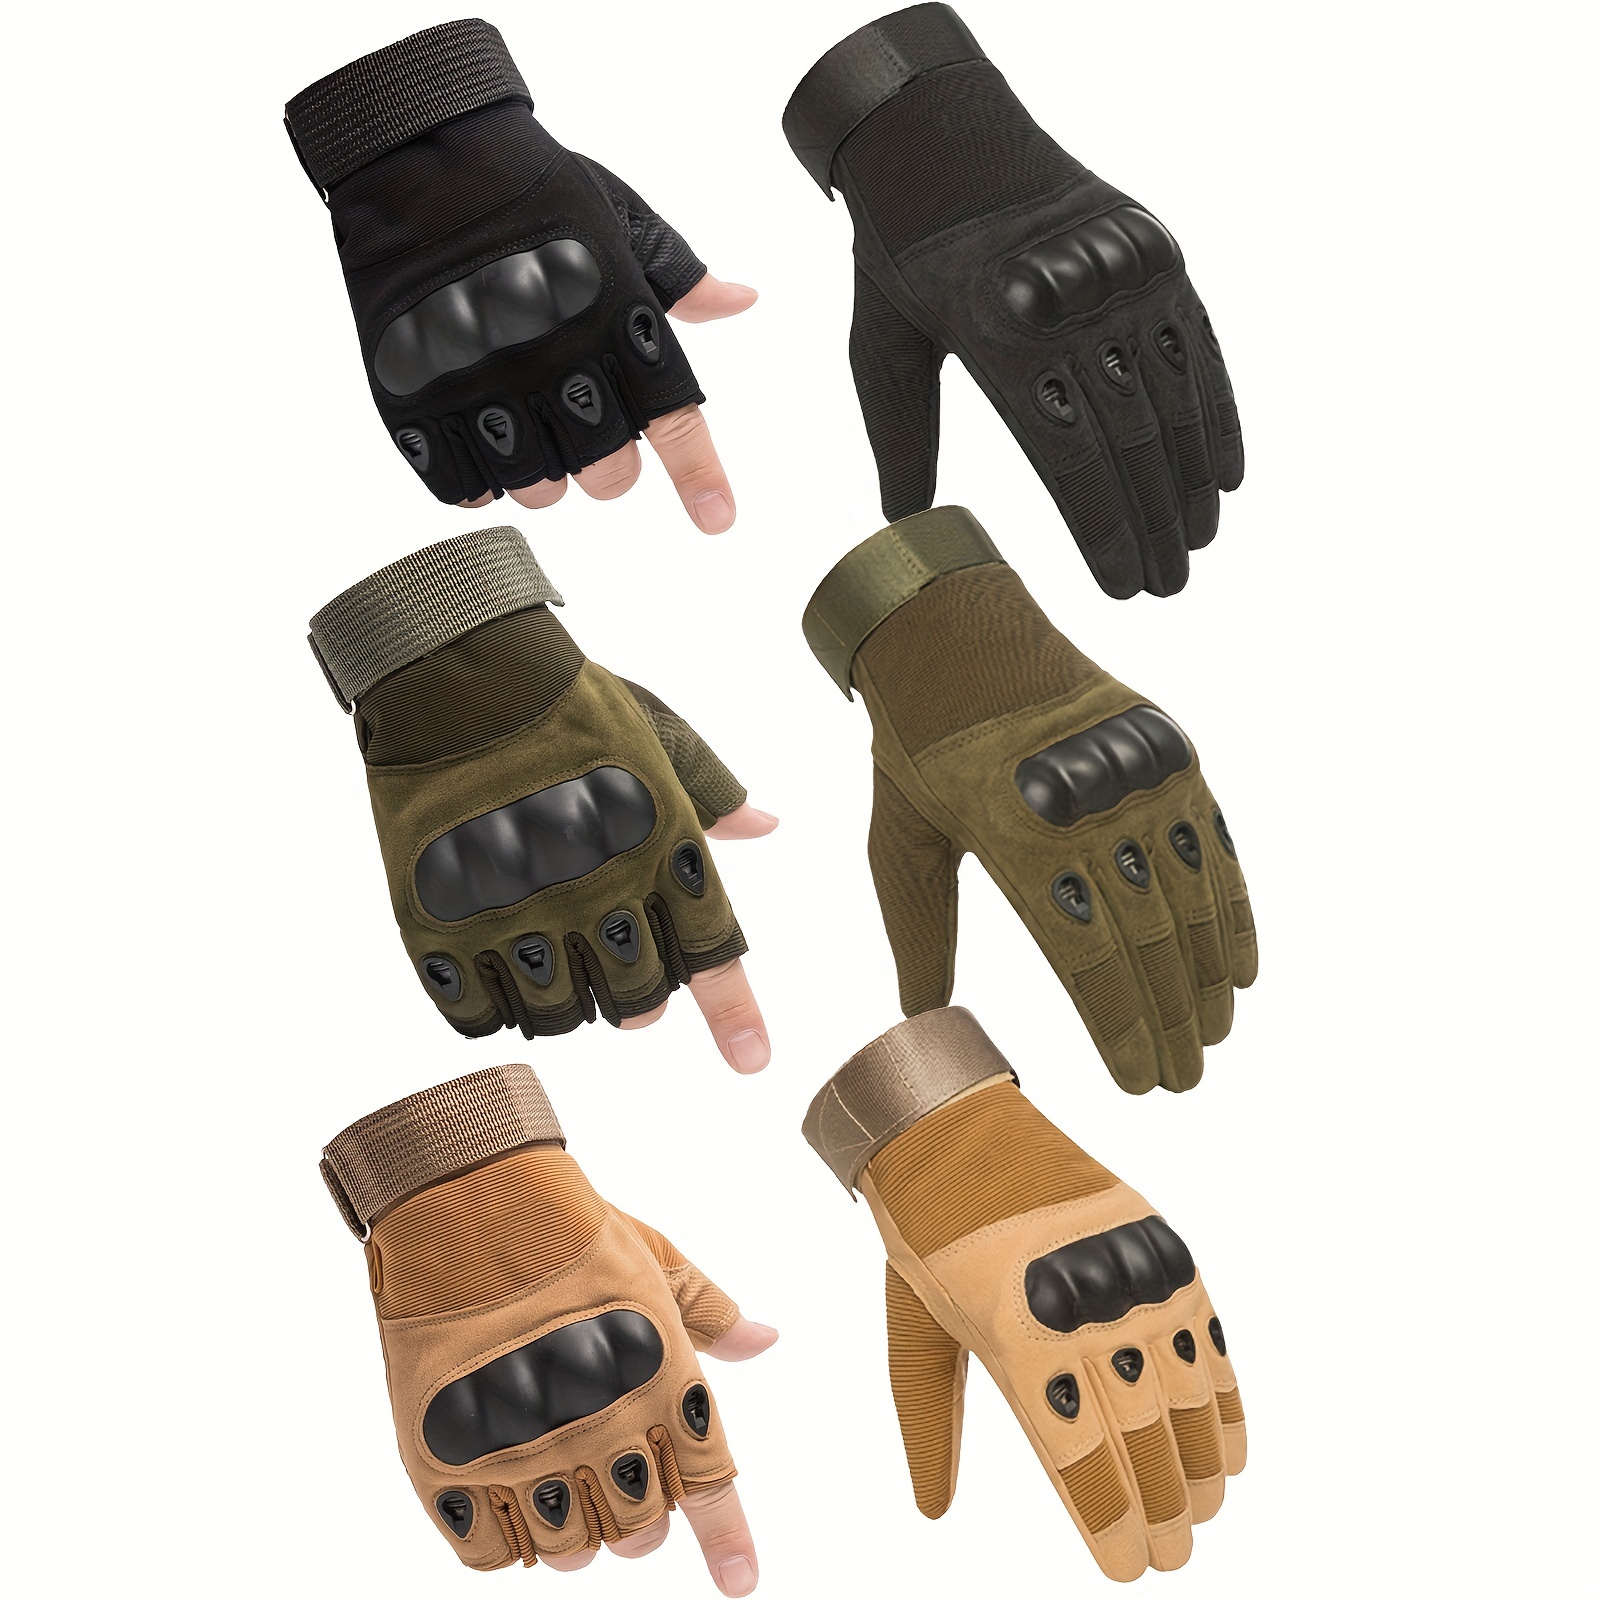 1 pair fingerless gloves for men finger work gloves with hard knuckle for outdoor work sports motorcycle cycling tactical training airsoft paintball shooting hunting hiking camping climbing